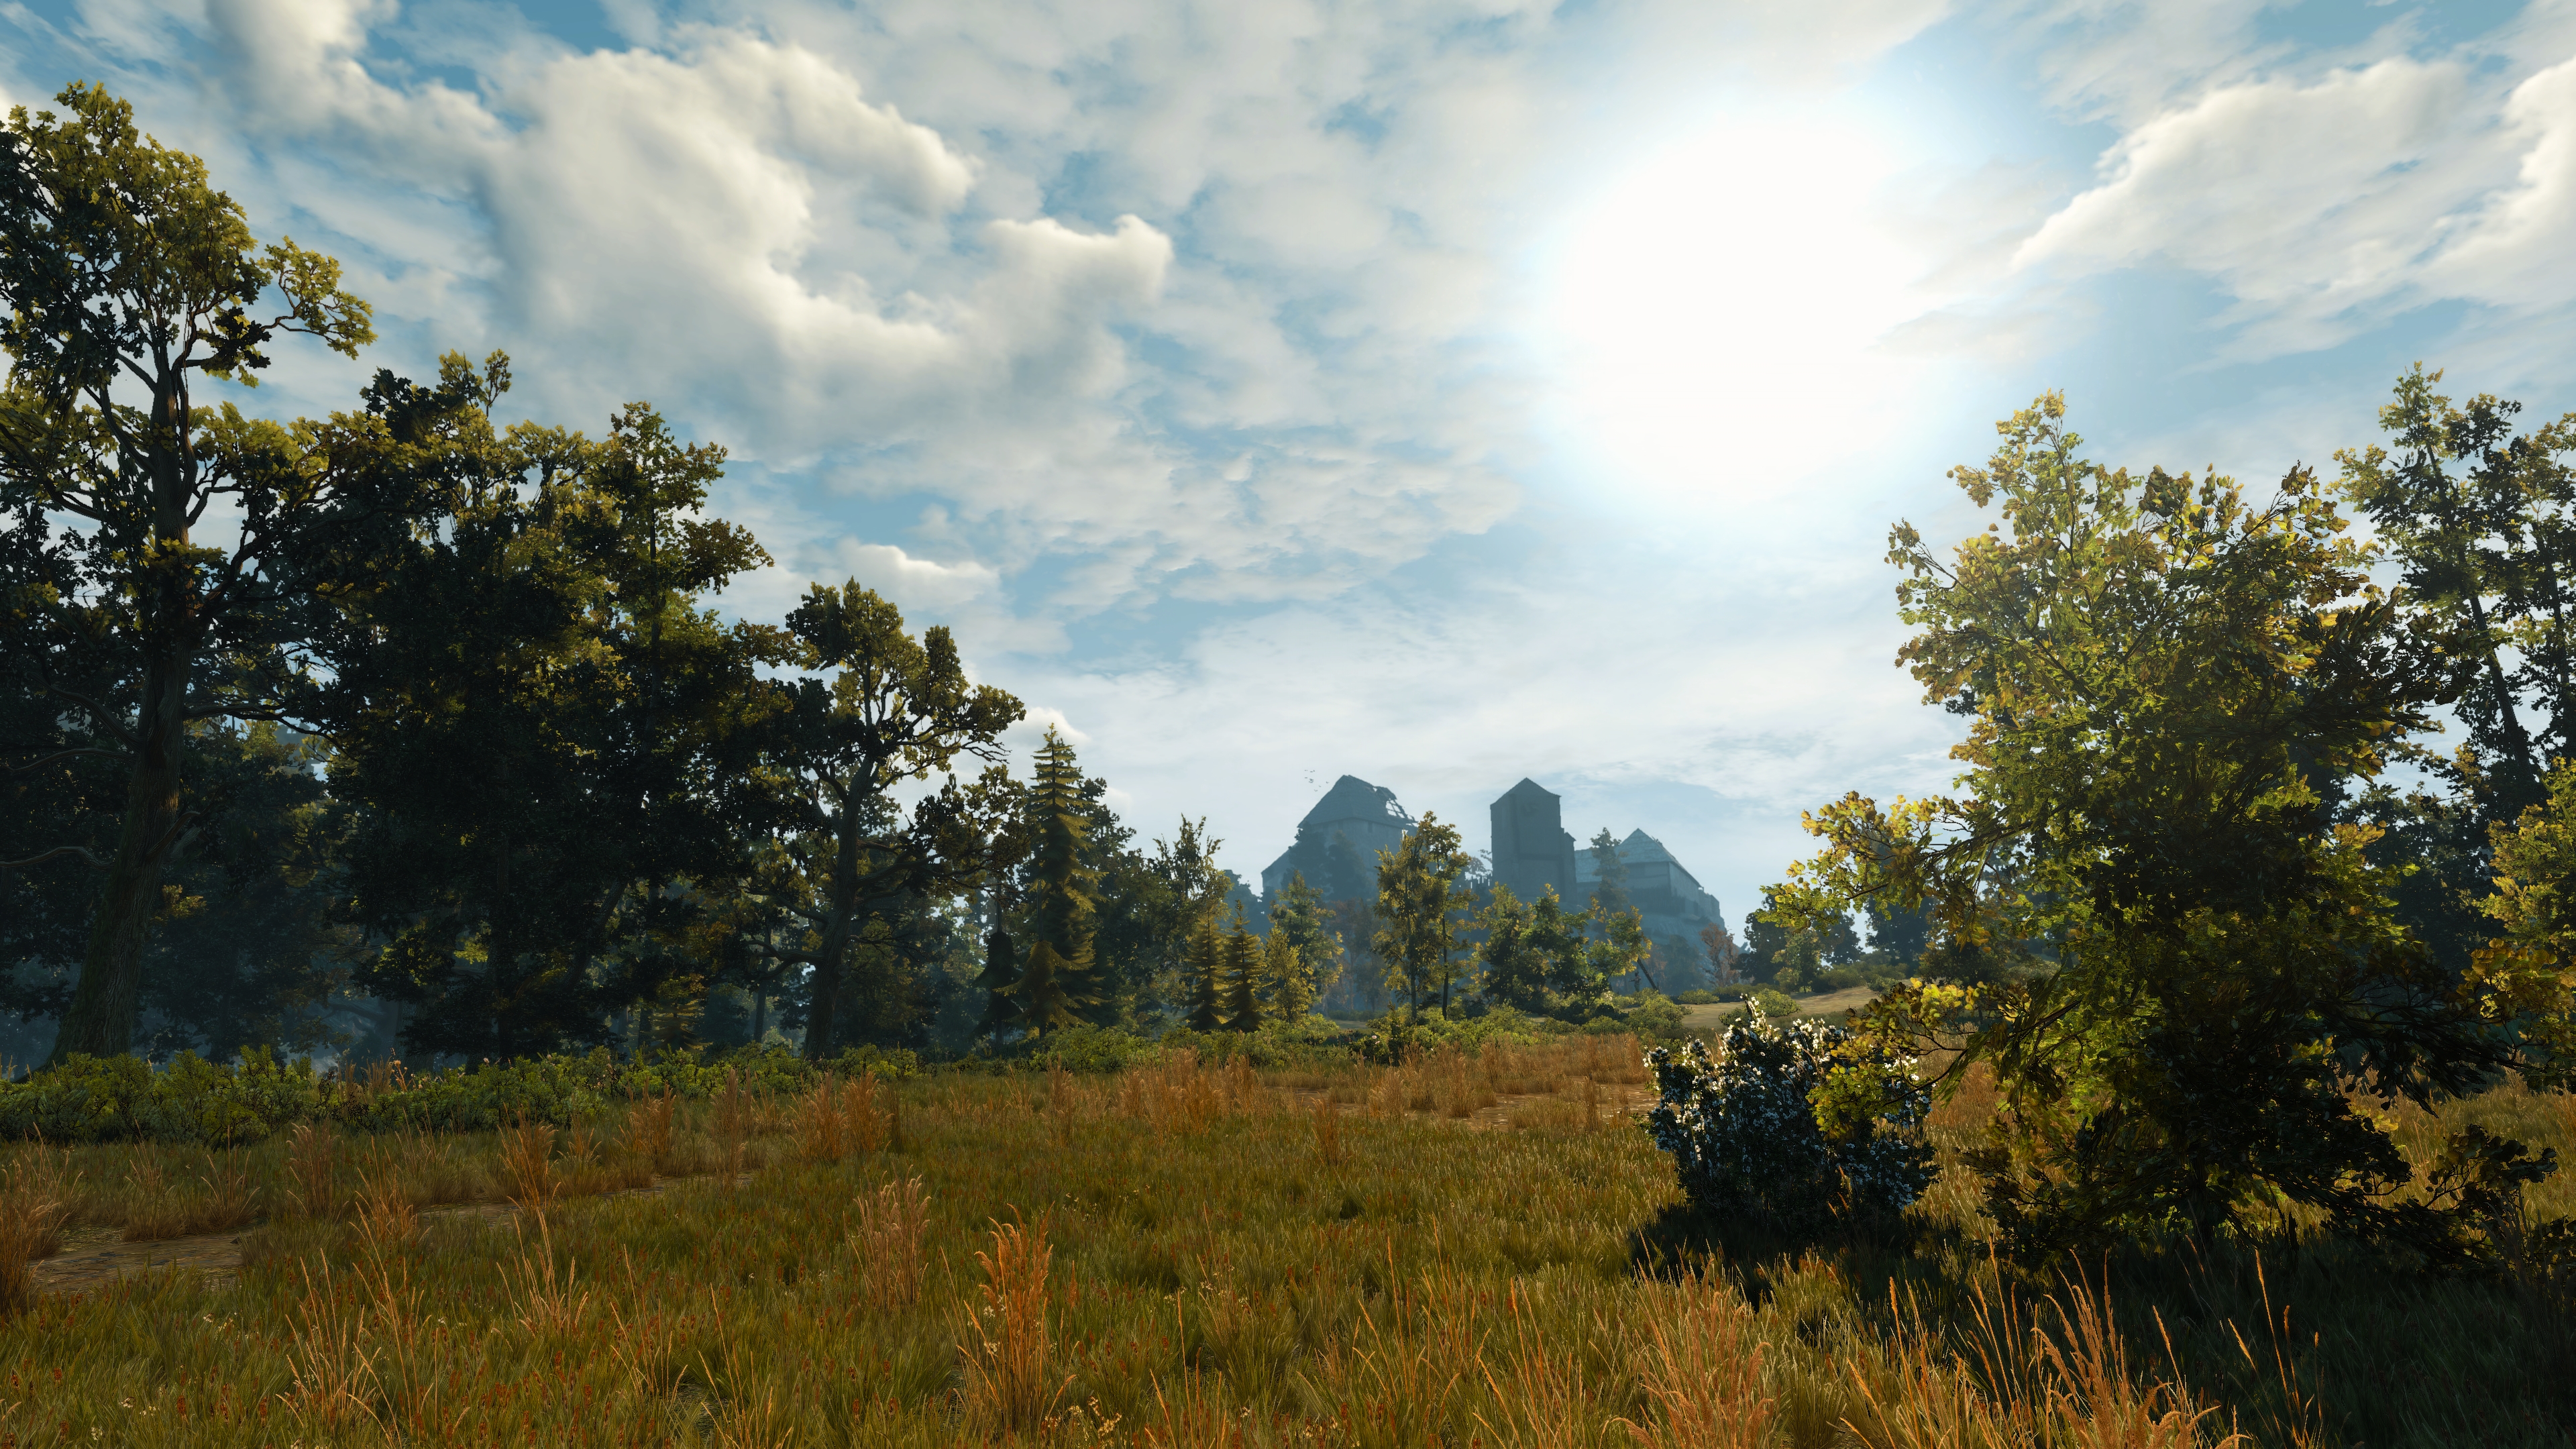 General 3840x2160 The Witcher 3: Wild Hunt screen shot PC gaming Geralt of Rivia The Witcher video game art digital art video games clouds sky trees sunlight field forest CGI